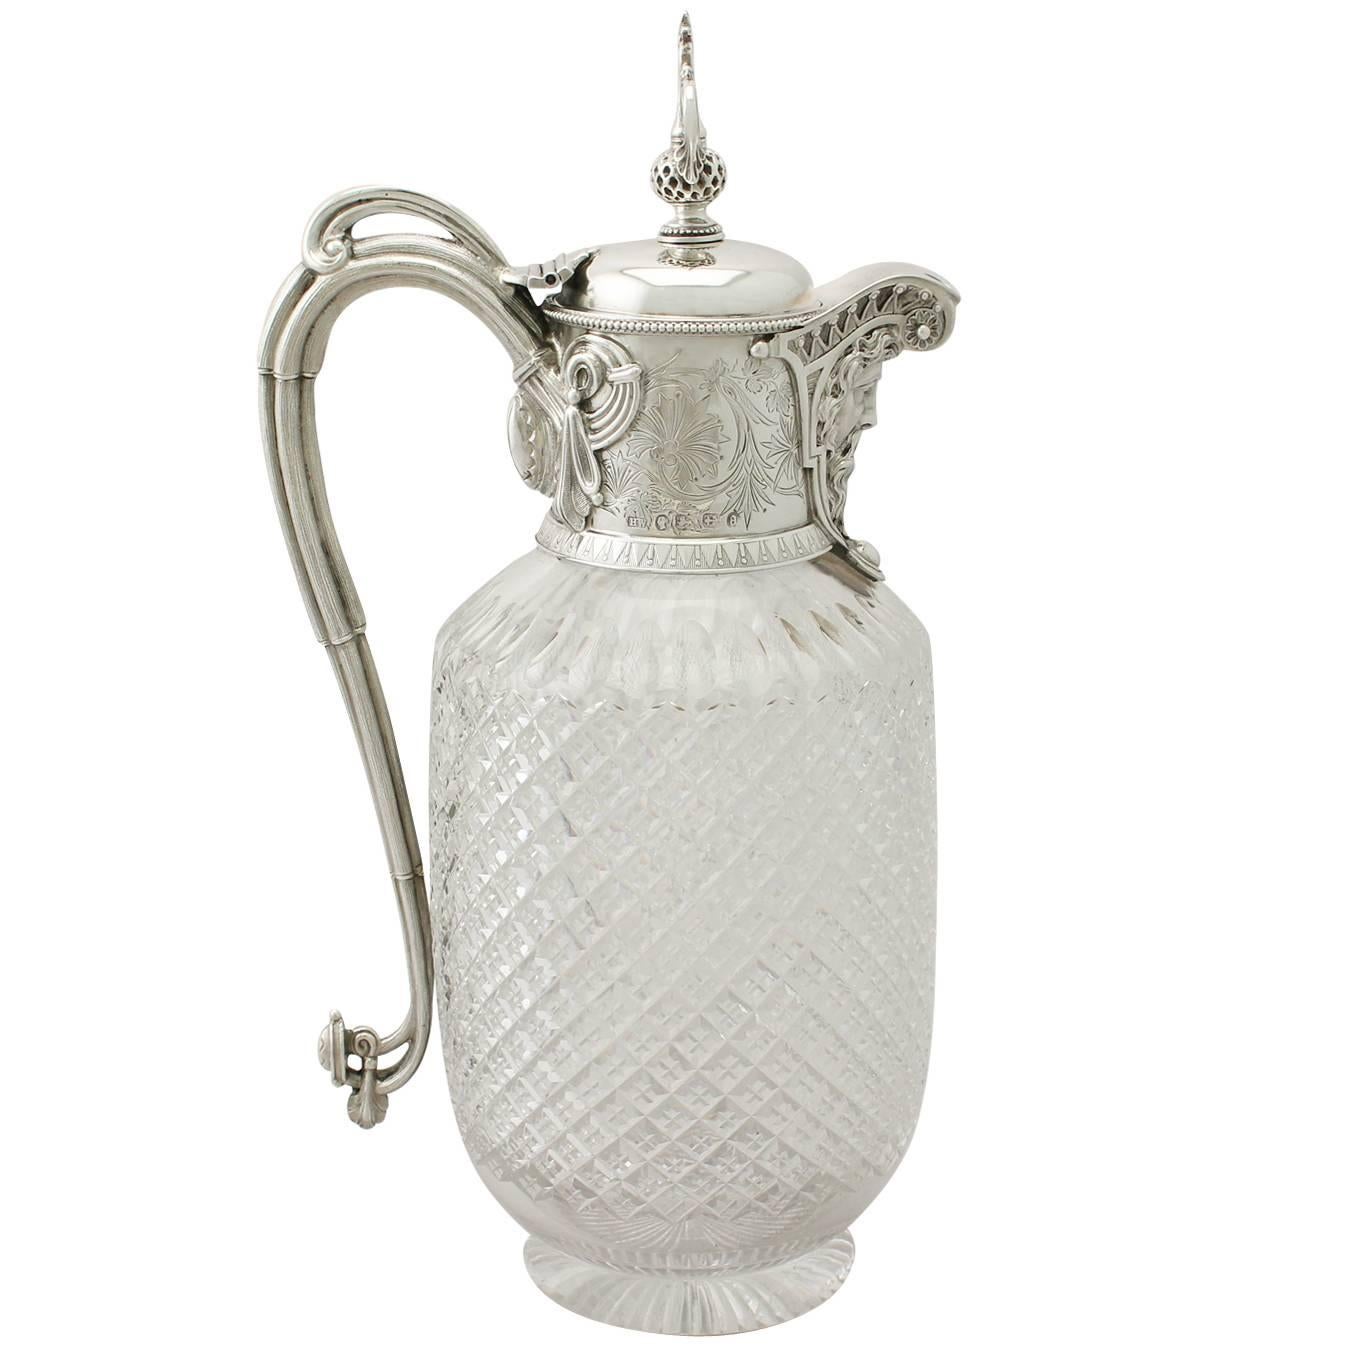 Cut-Glass and Sterling Silver-Mounted Claret Jug, Antique Victorian